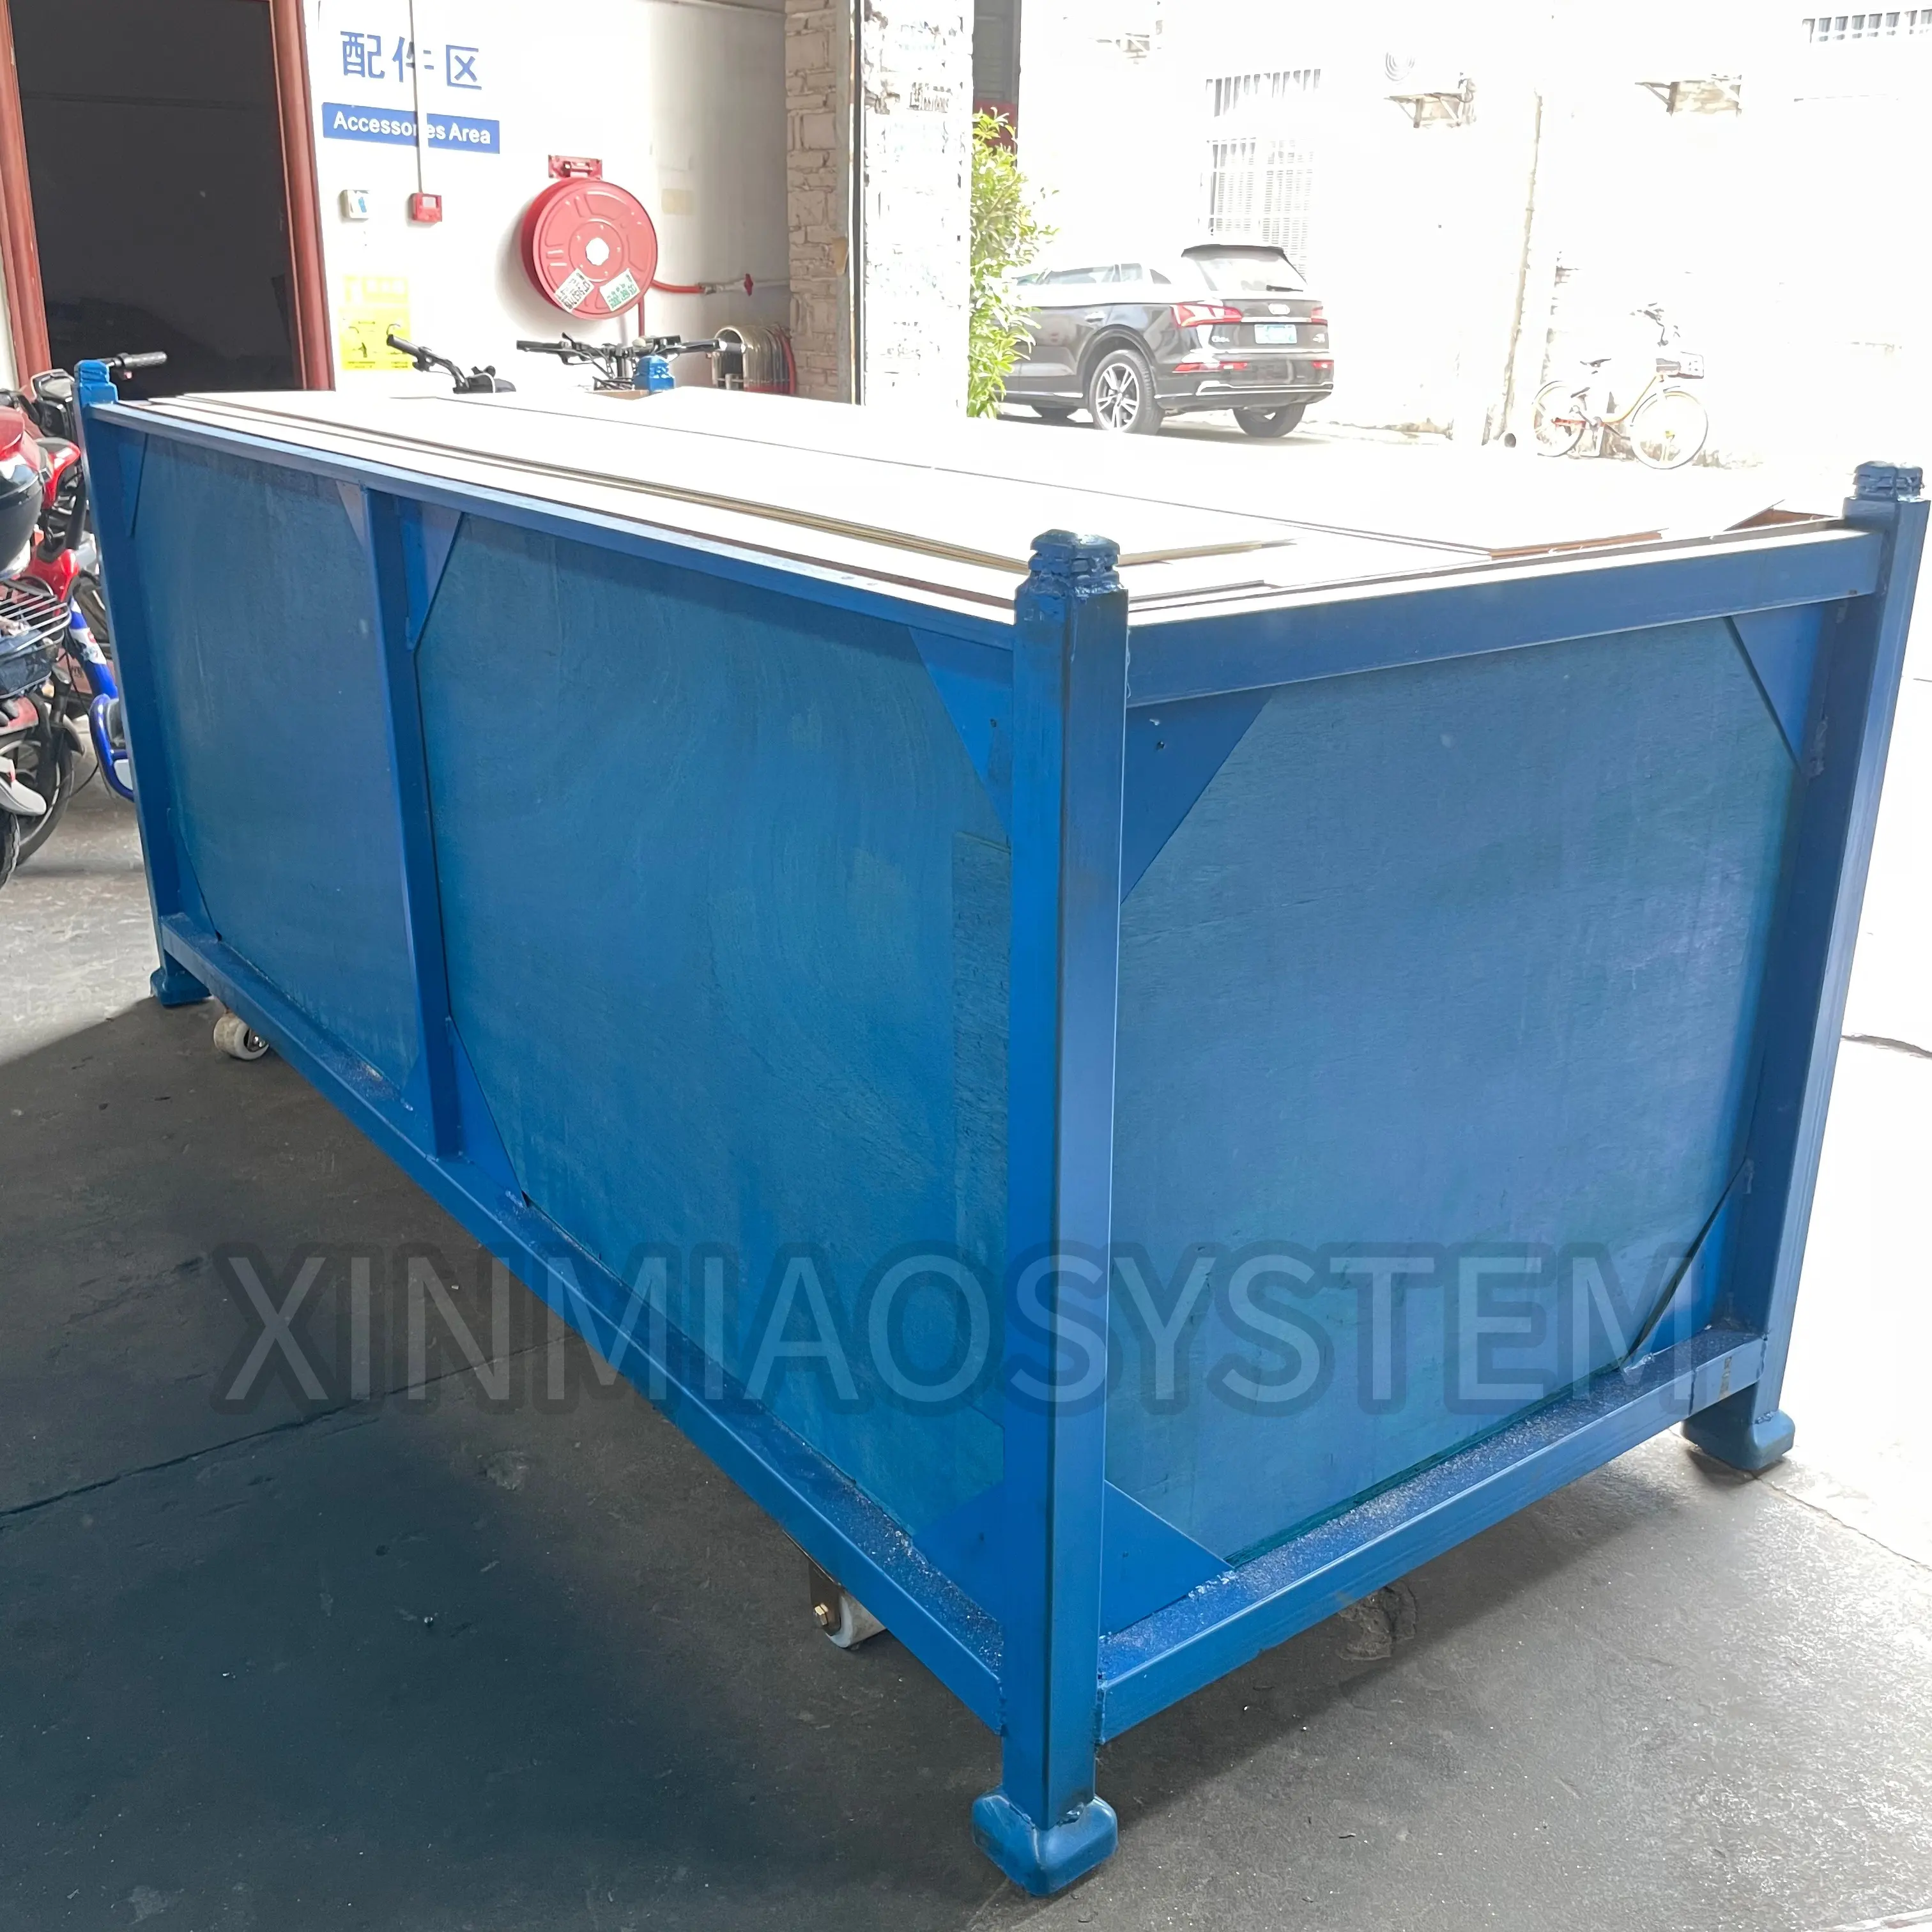 Exhibition Booth Materials Moving Storage Boxes,Heavy Duty Road-case Turnover Boxes with Wheels